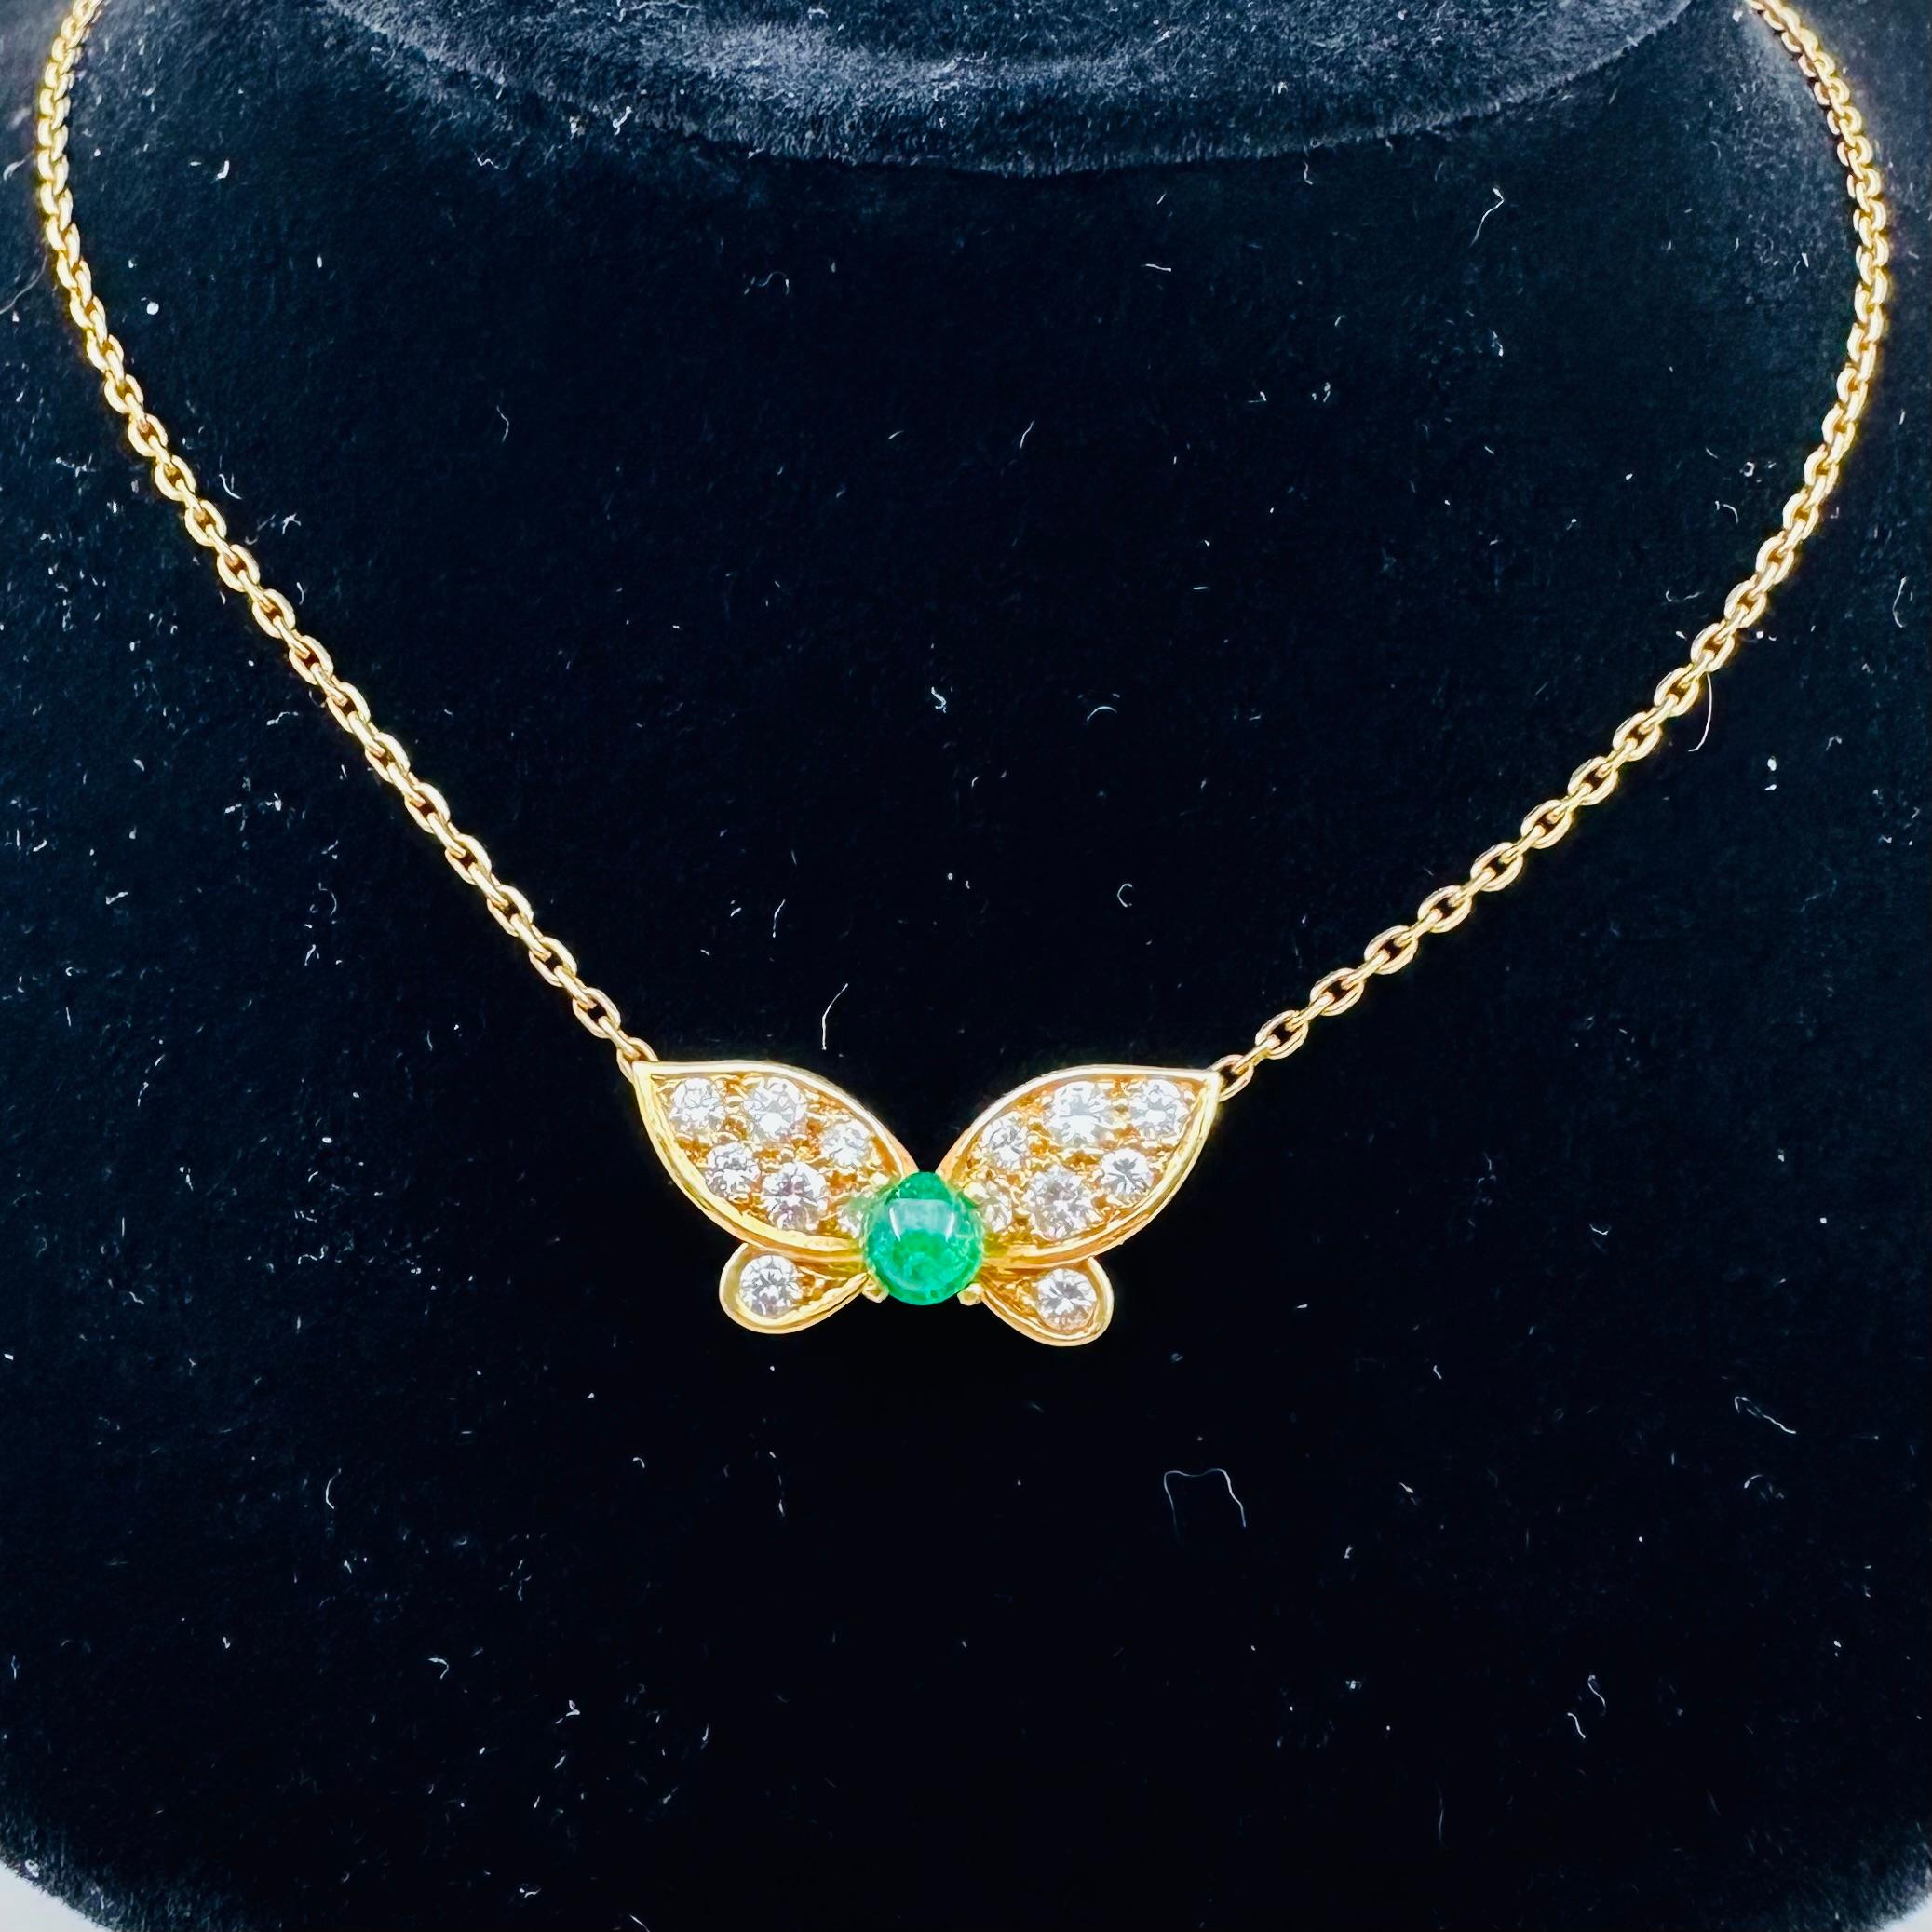 Van Cleef & Arpels 
Green Emerald & Diamonds Butterfly Necklace
 One cabochon Green Emerald est. 0.50 ct and round brilliant-cut D-F VVS1-VVS2 diamonds weighing an estimated 0.50 carats. 
18K Yellow Gold chain has  an adjustable length from 15 to